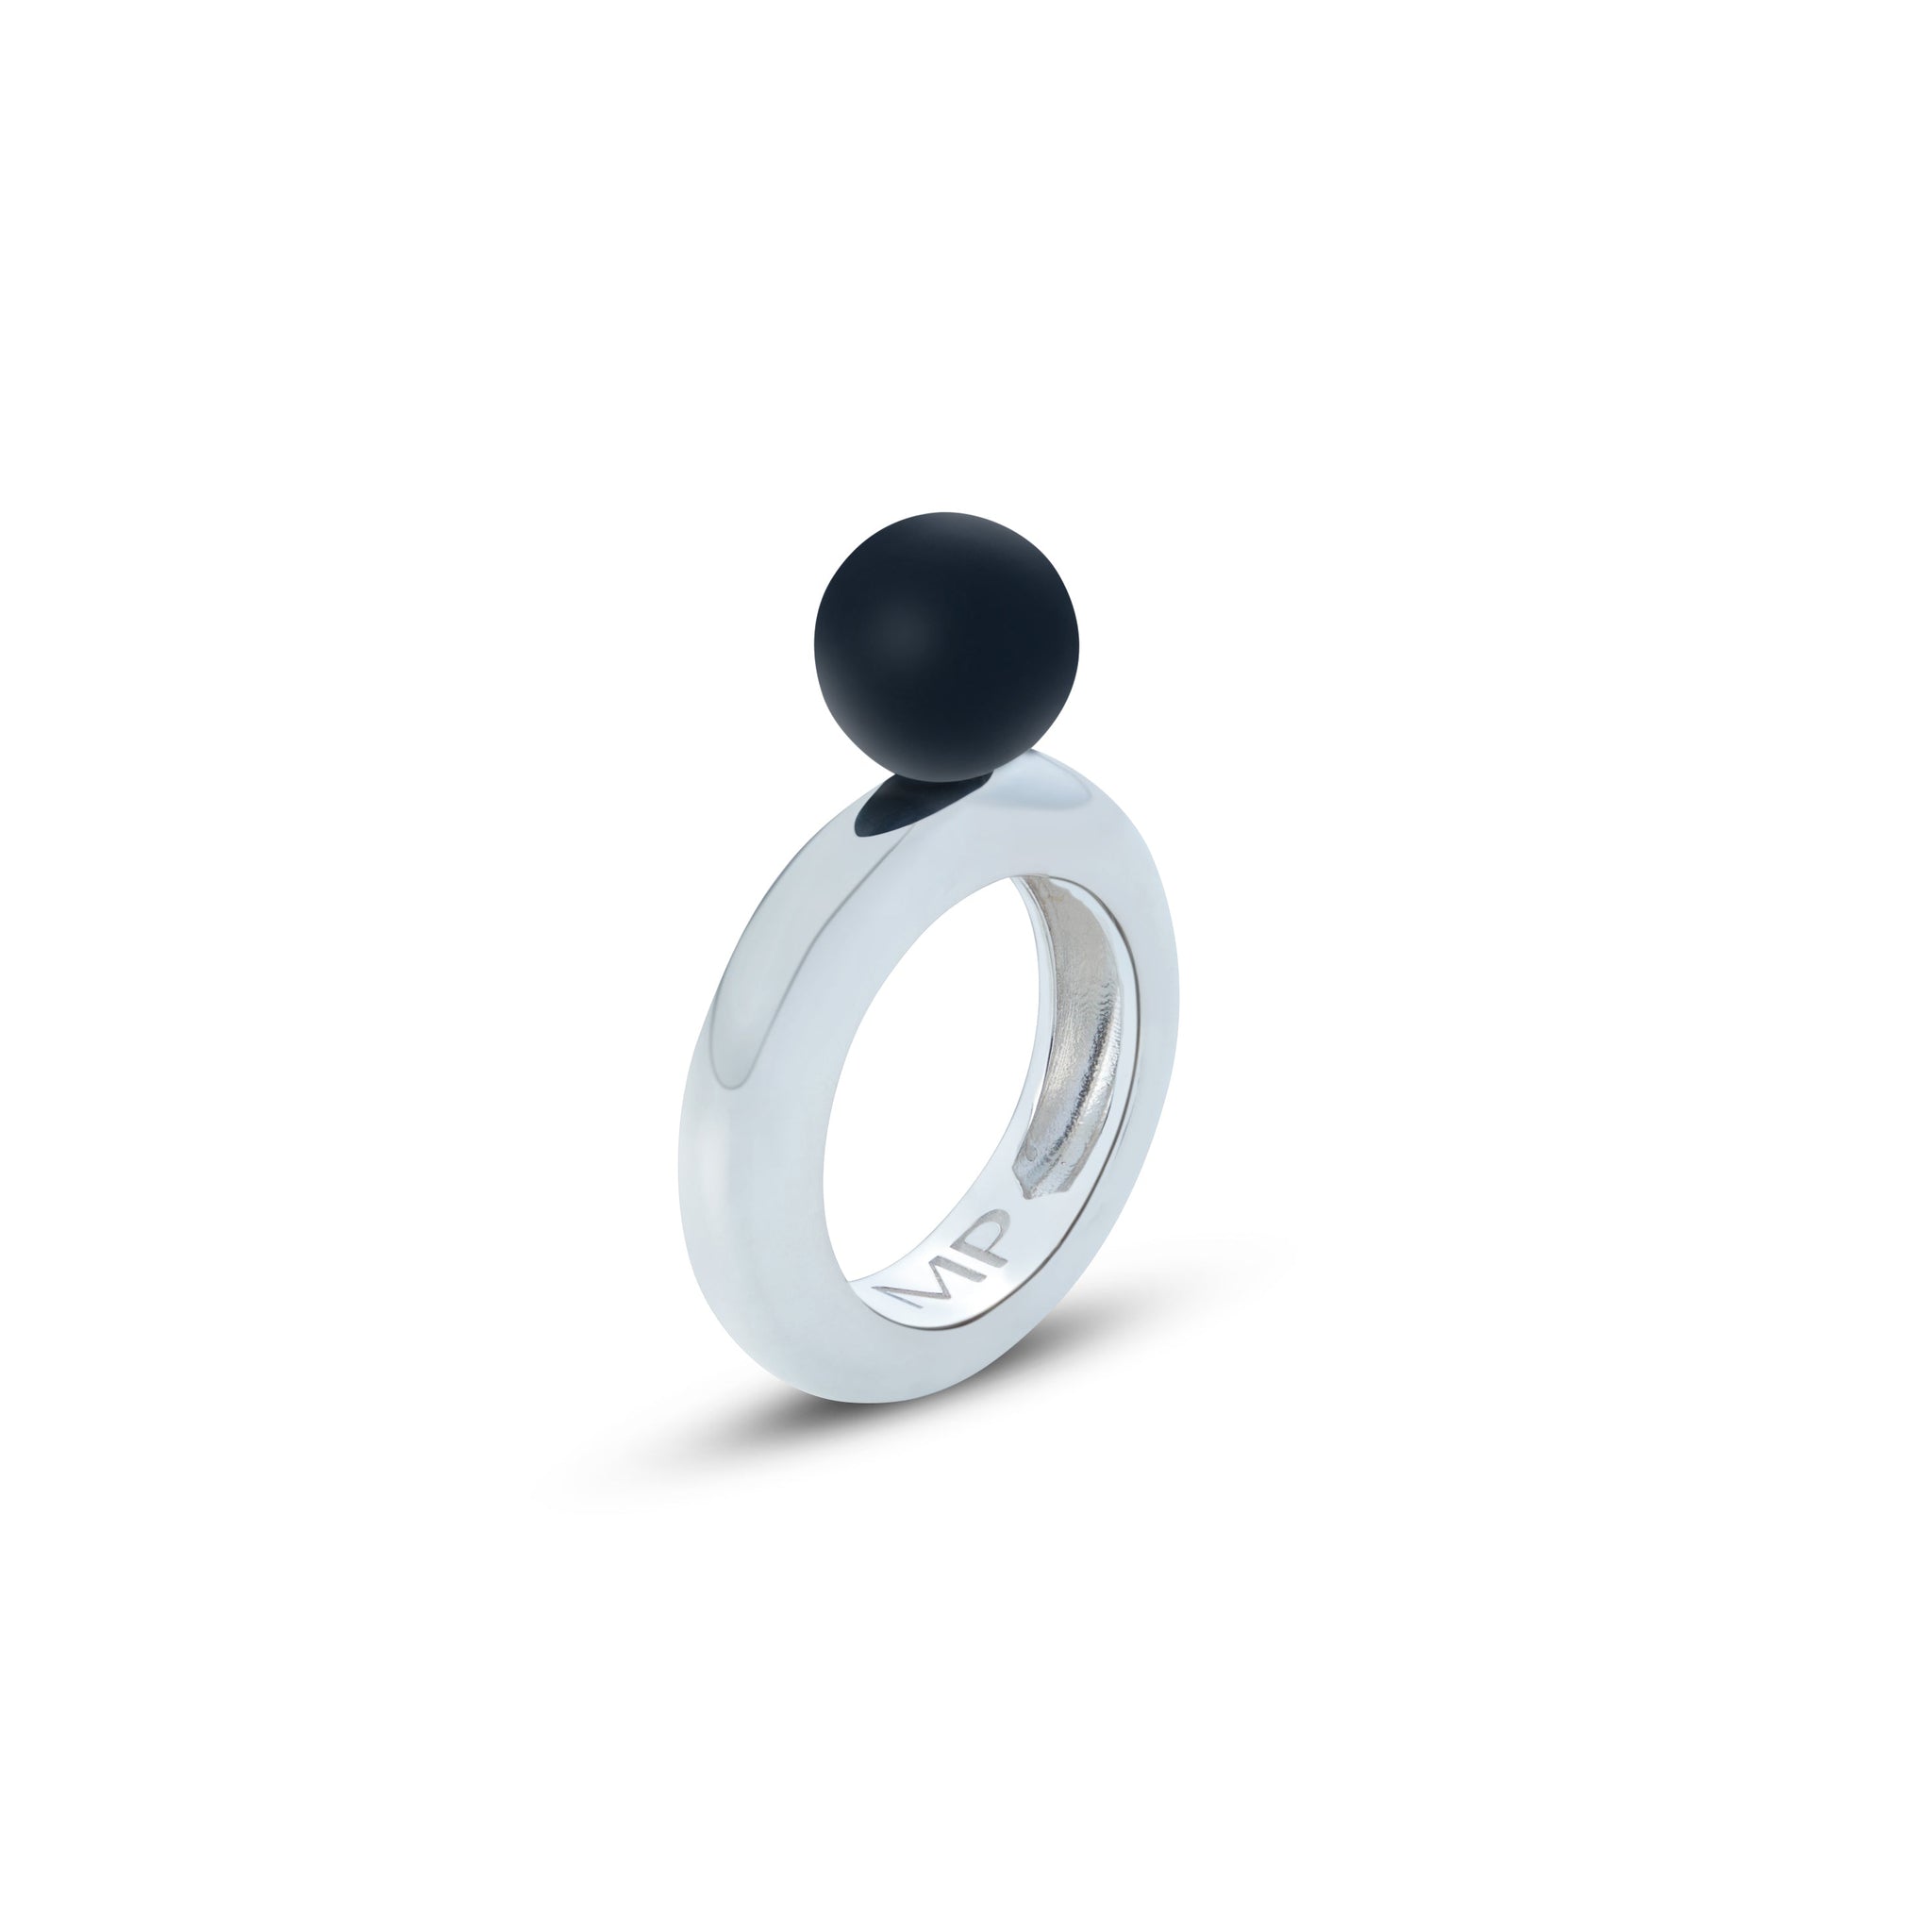 Madame Palm solitaire ring self-love in black silicone pearl and white gold 18kt band